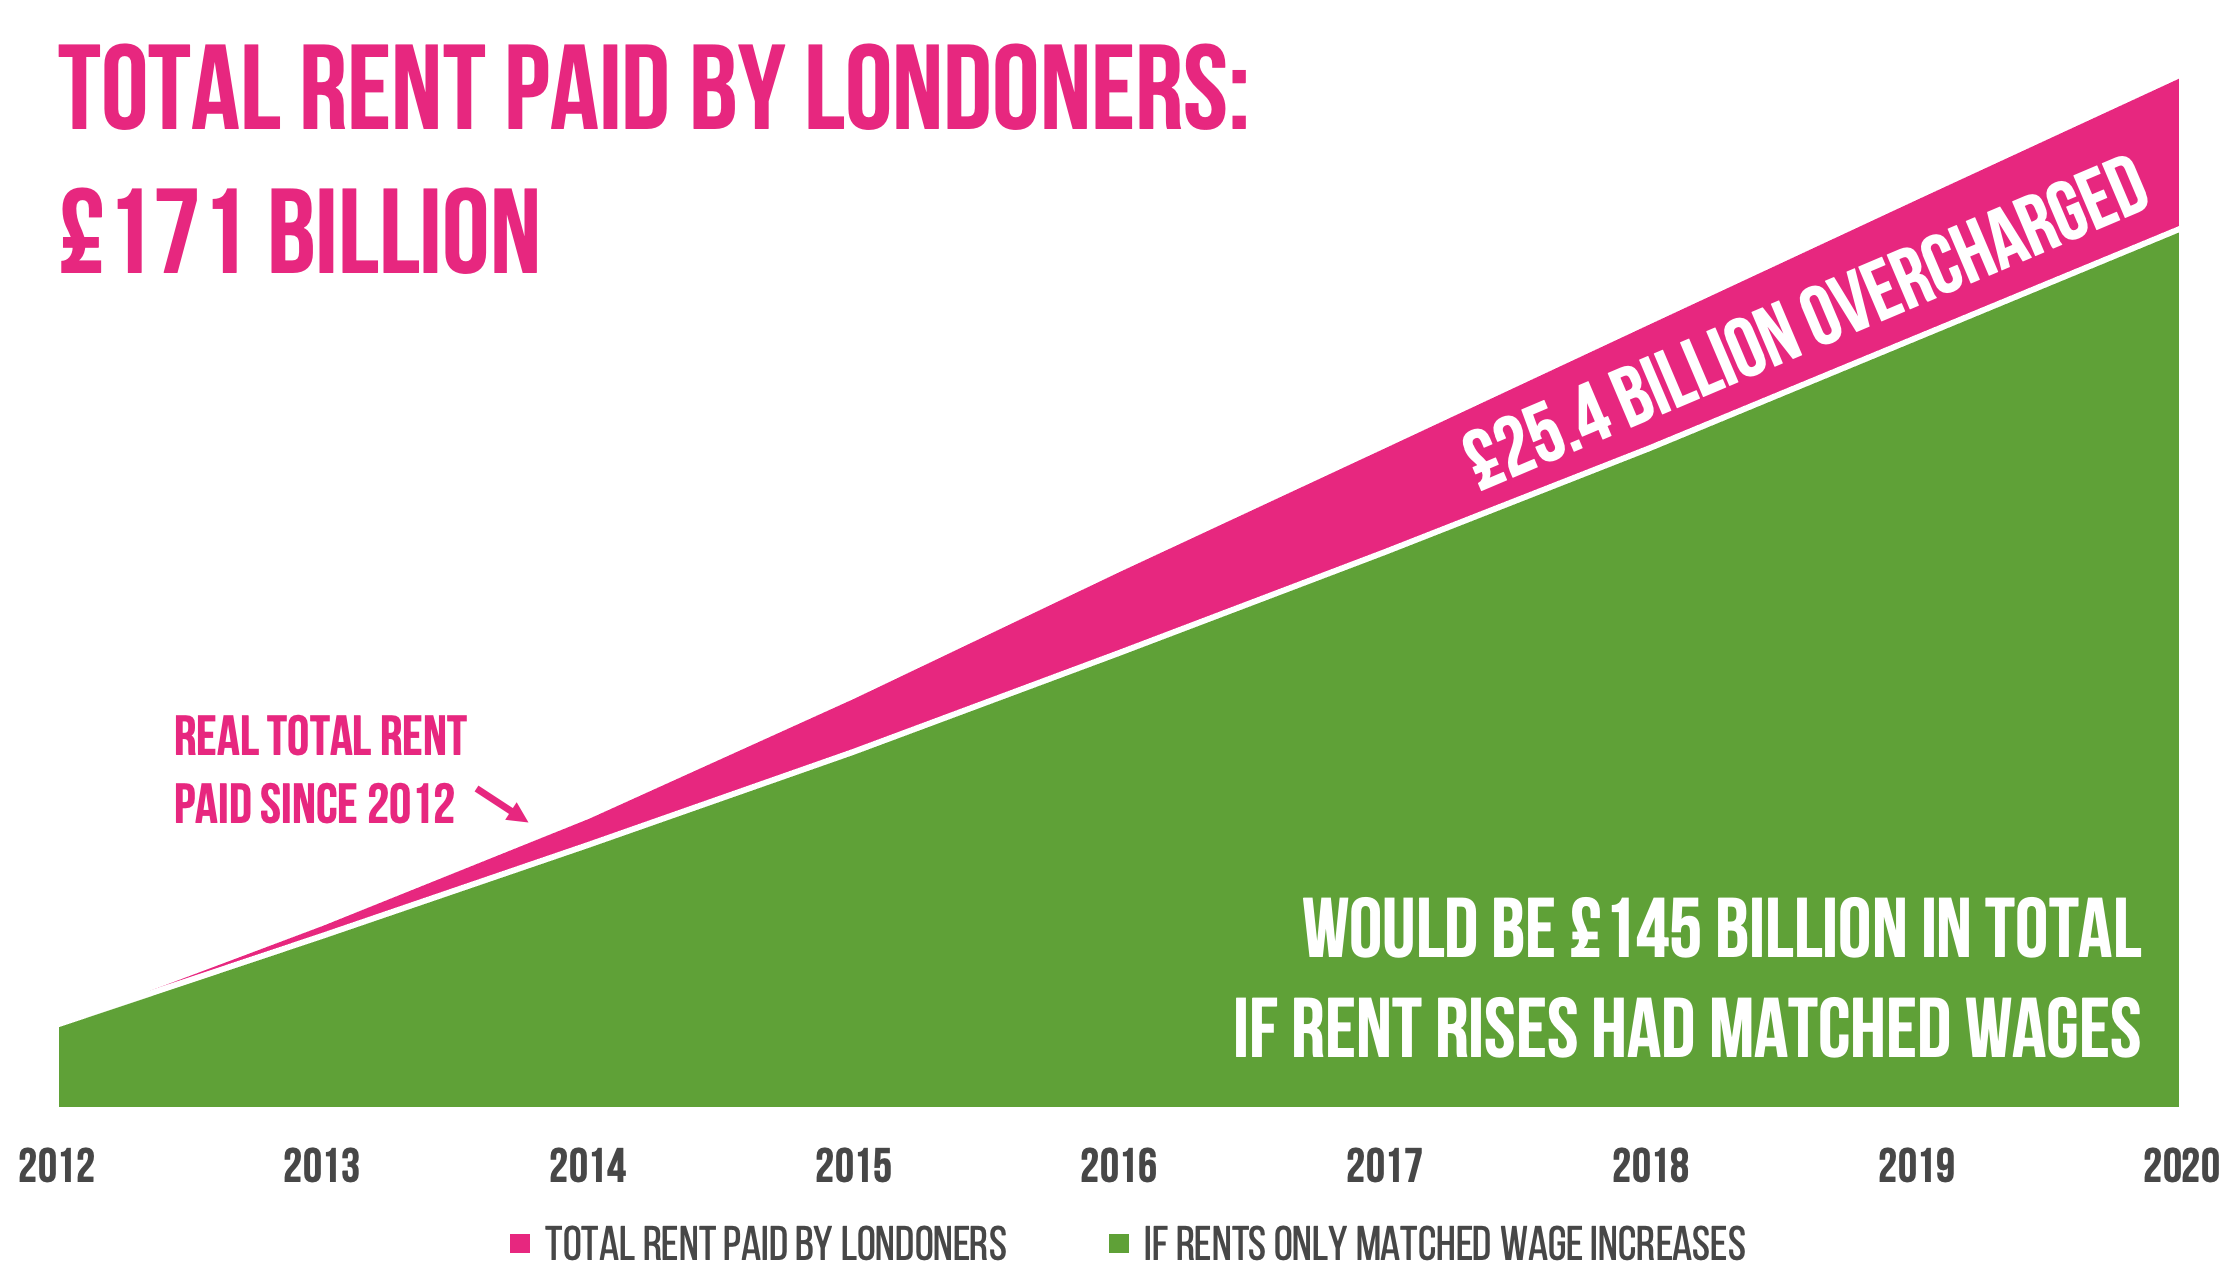 Chart showing £25.4 billion in excess rent paid by Londoners since 2012, compared with if rent rises had matched wage increases